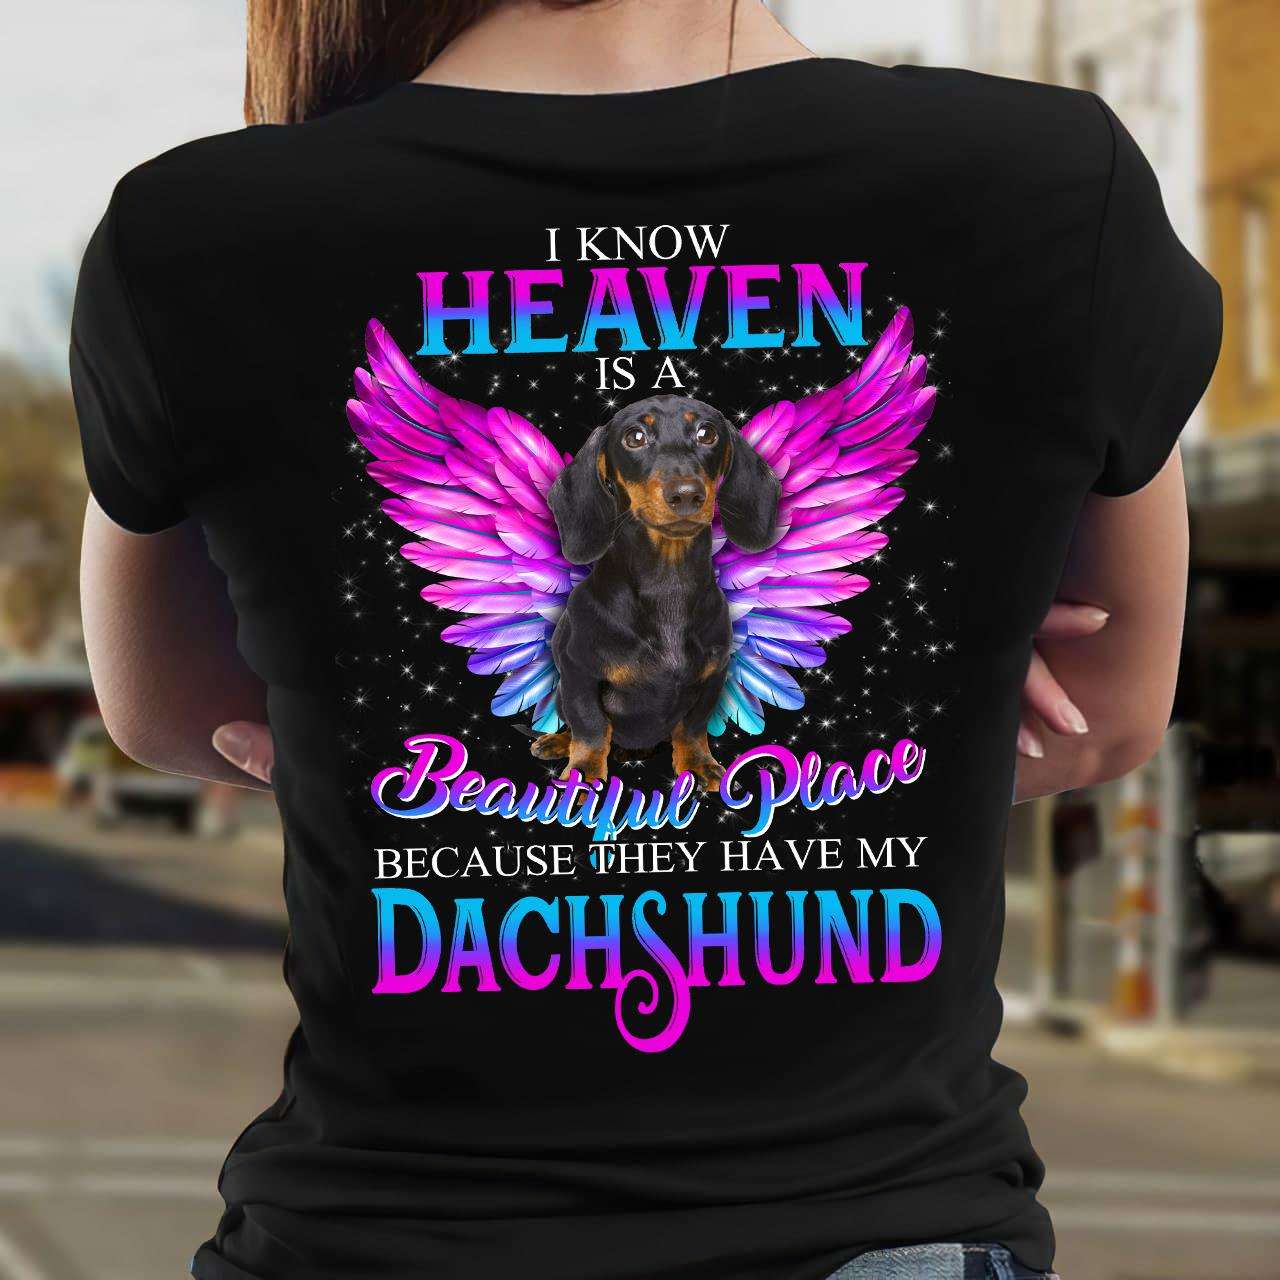 Dachshund In Heaven - I know heaven is a beautiful place because they have my dachshund